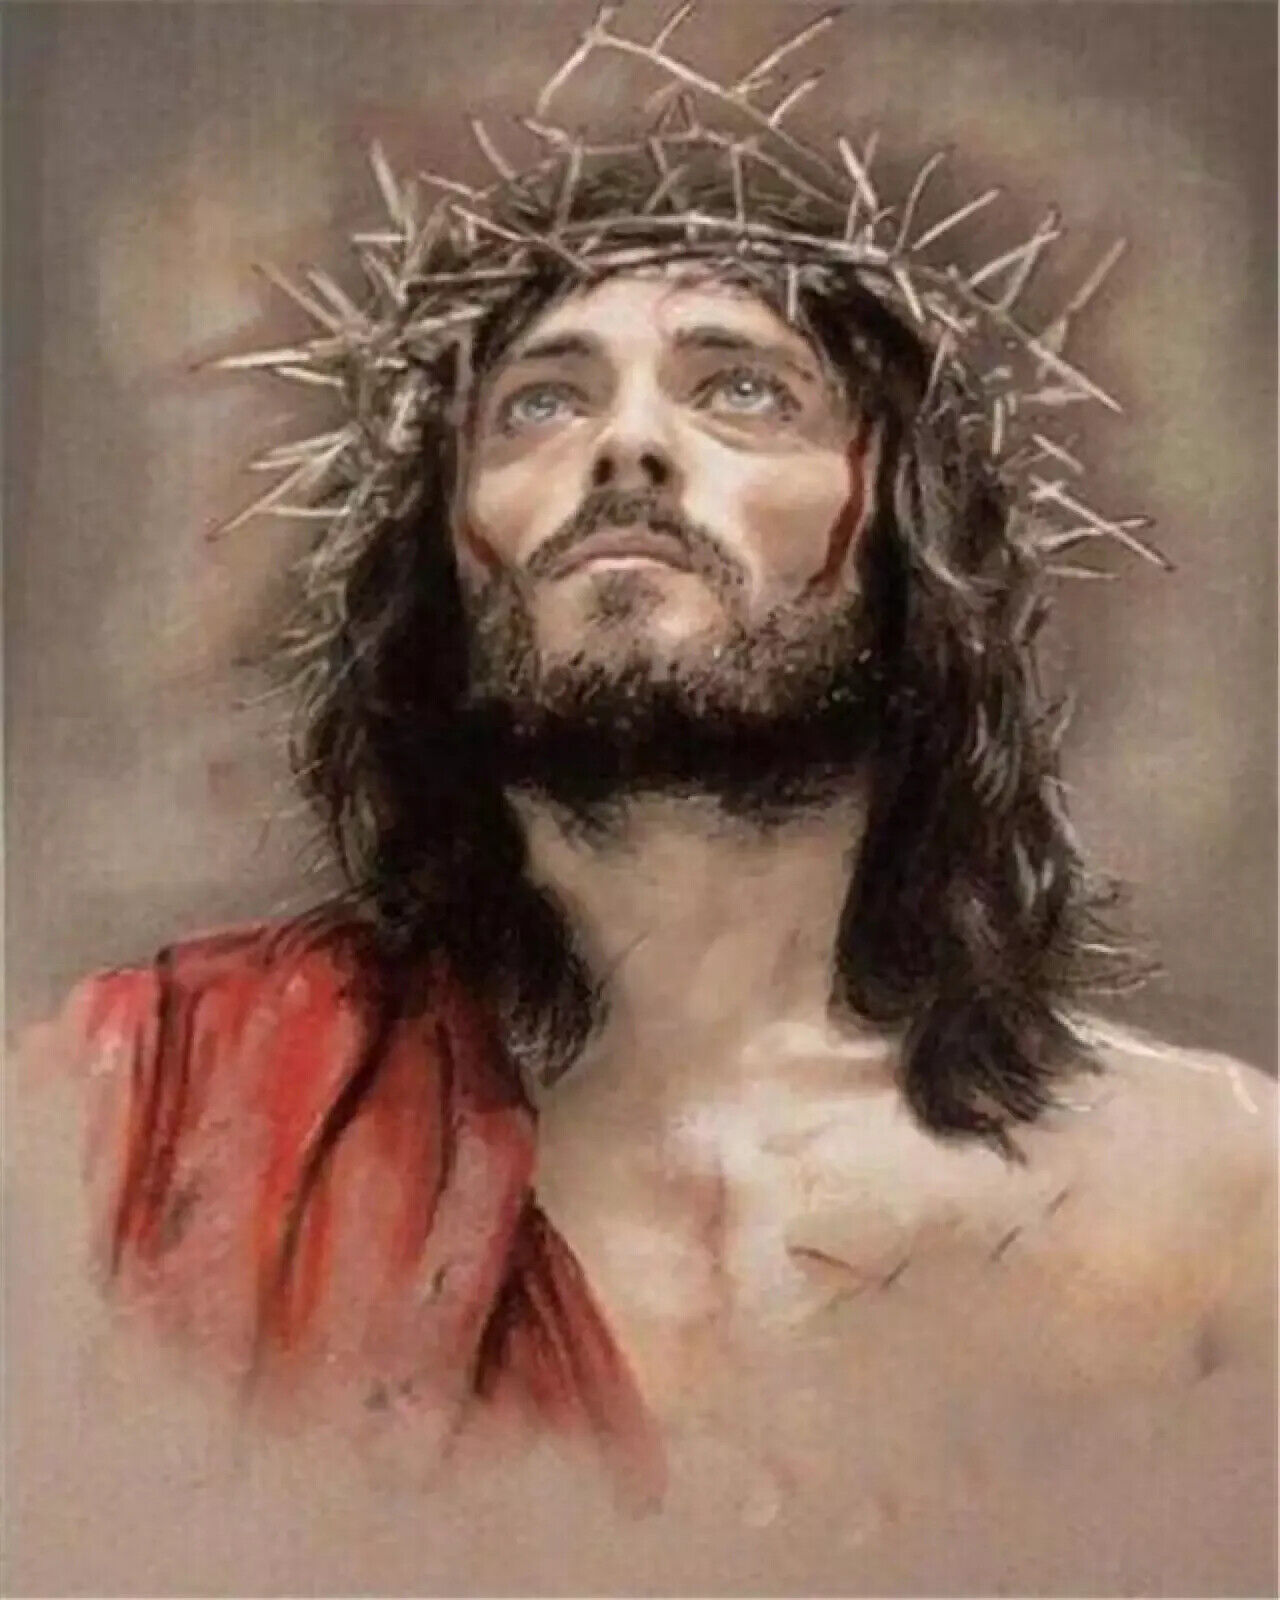 JESUS CHRIST 8.5X11 CROWN OF THORNS PHOTO GOD FATHER SON HEAVEN ANGEL REPRINT